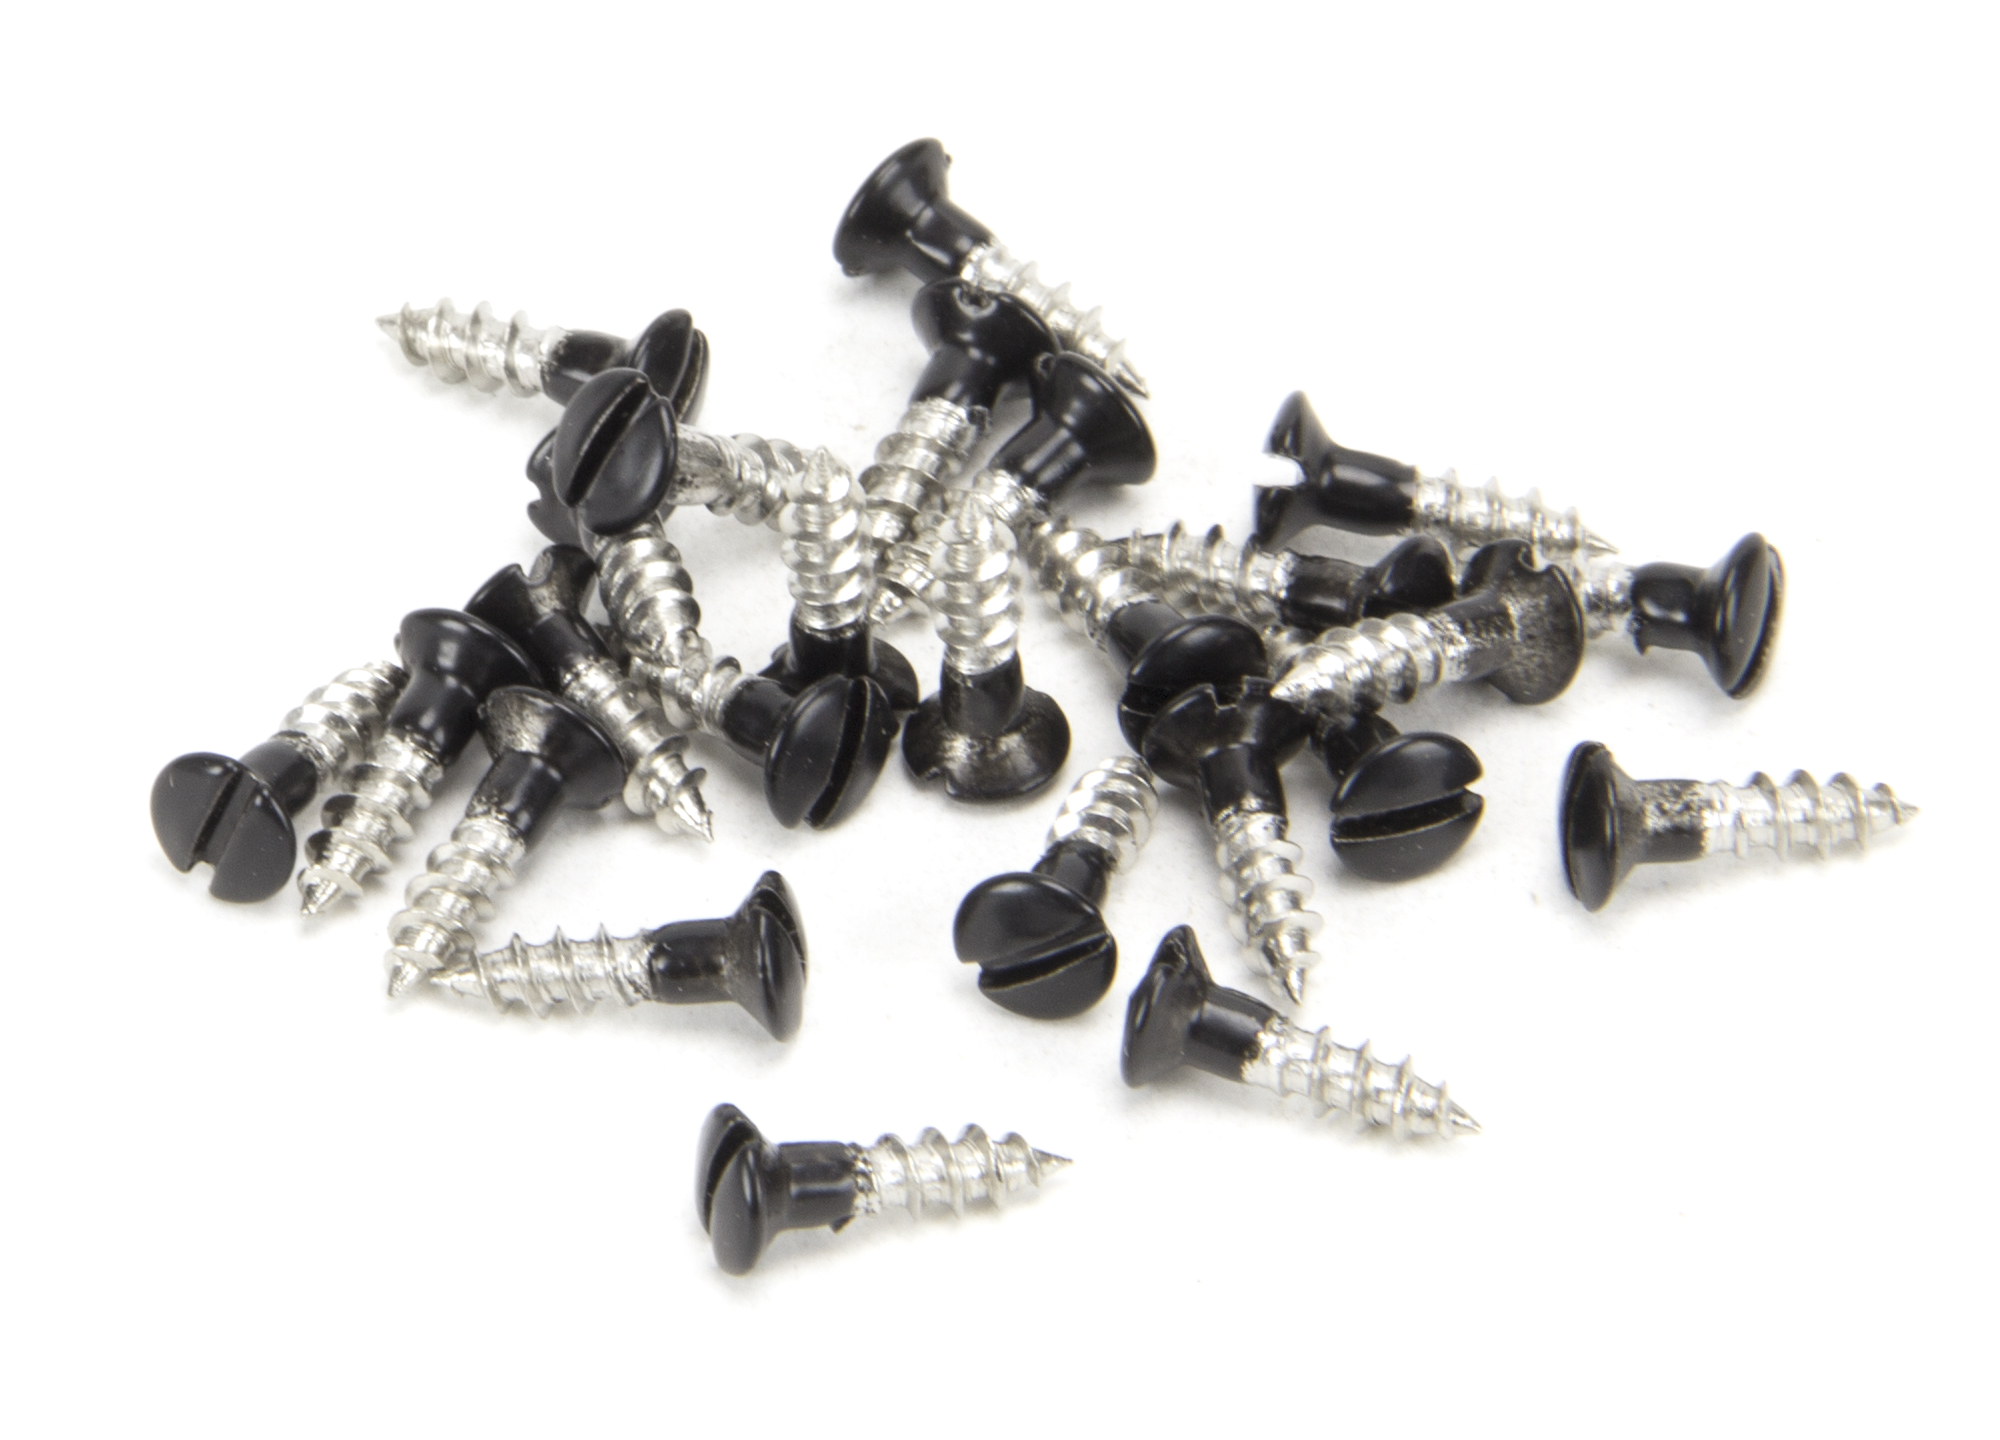 Countersunk Roundhead Screws - 3.0 x 12 - Pack of 25